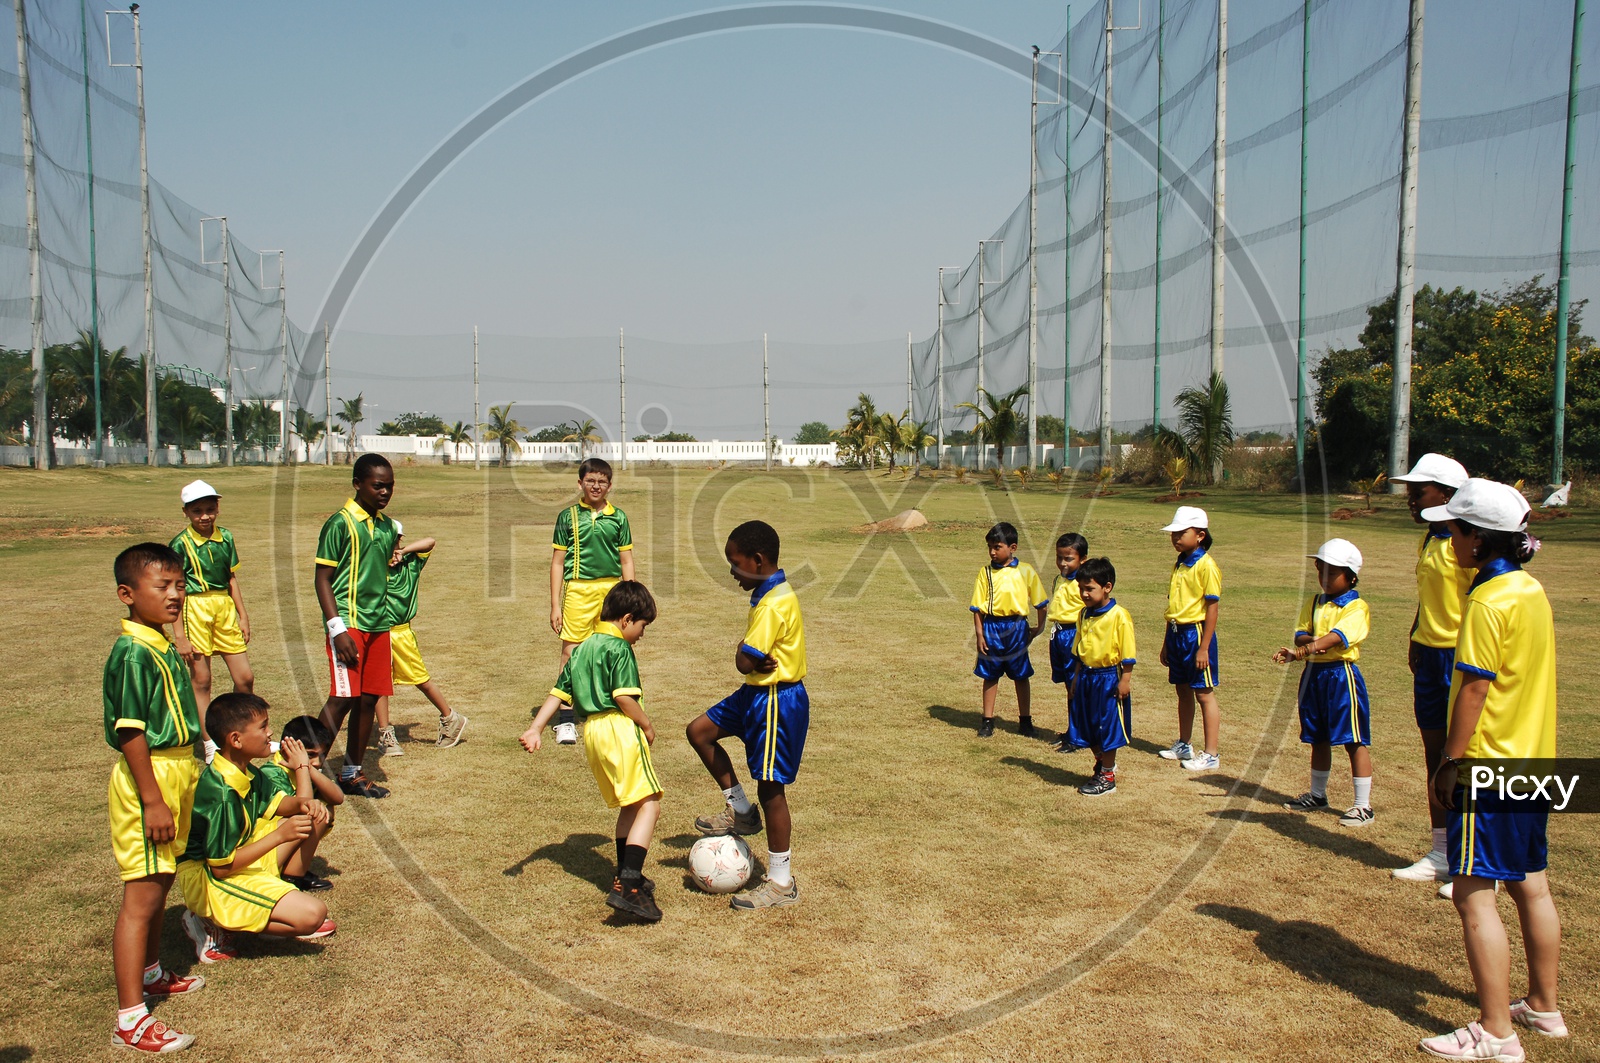 Children at the School Sport day - Playing Football